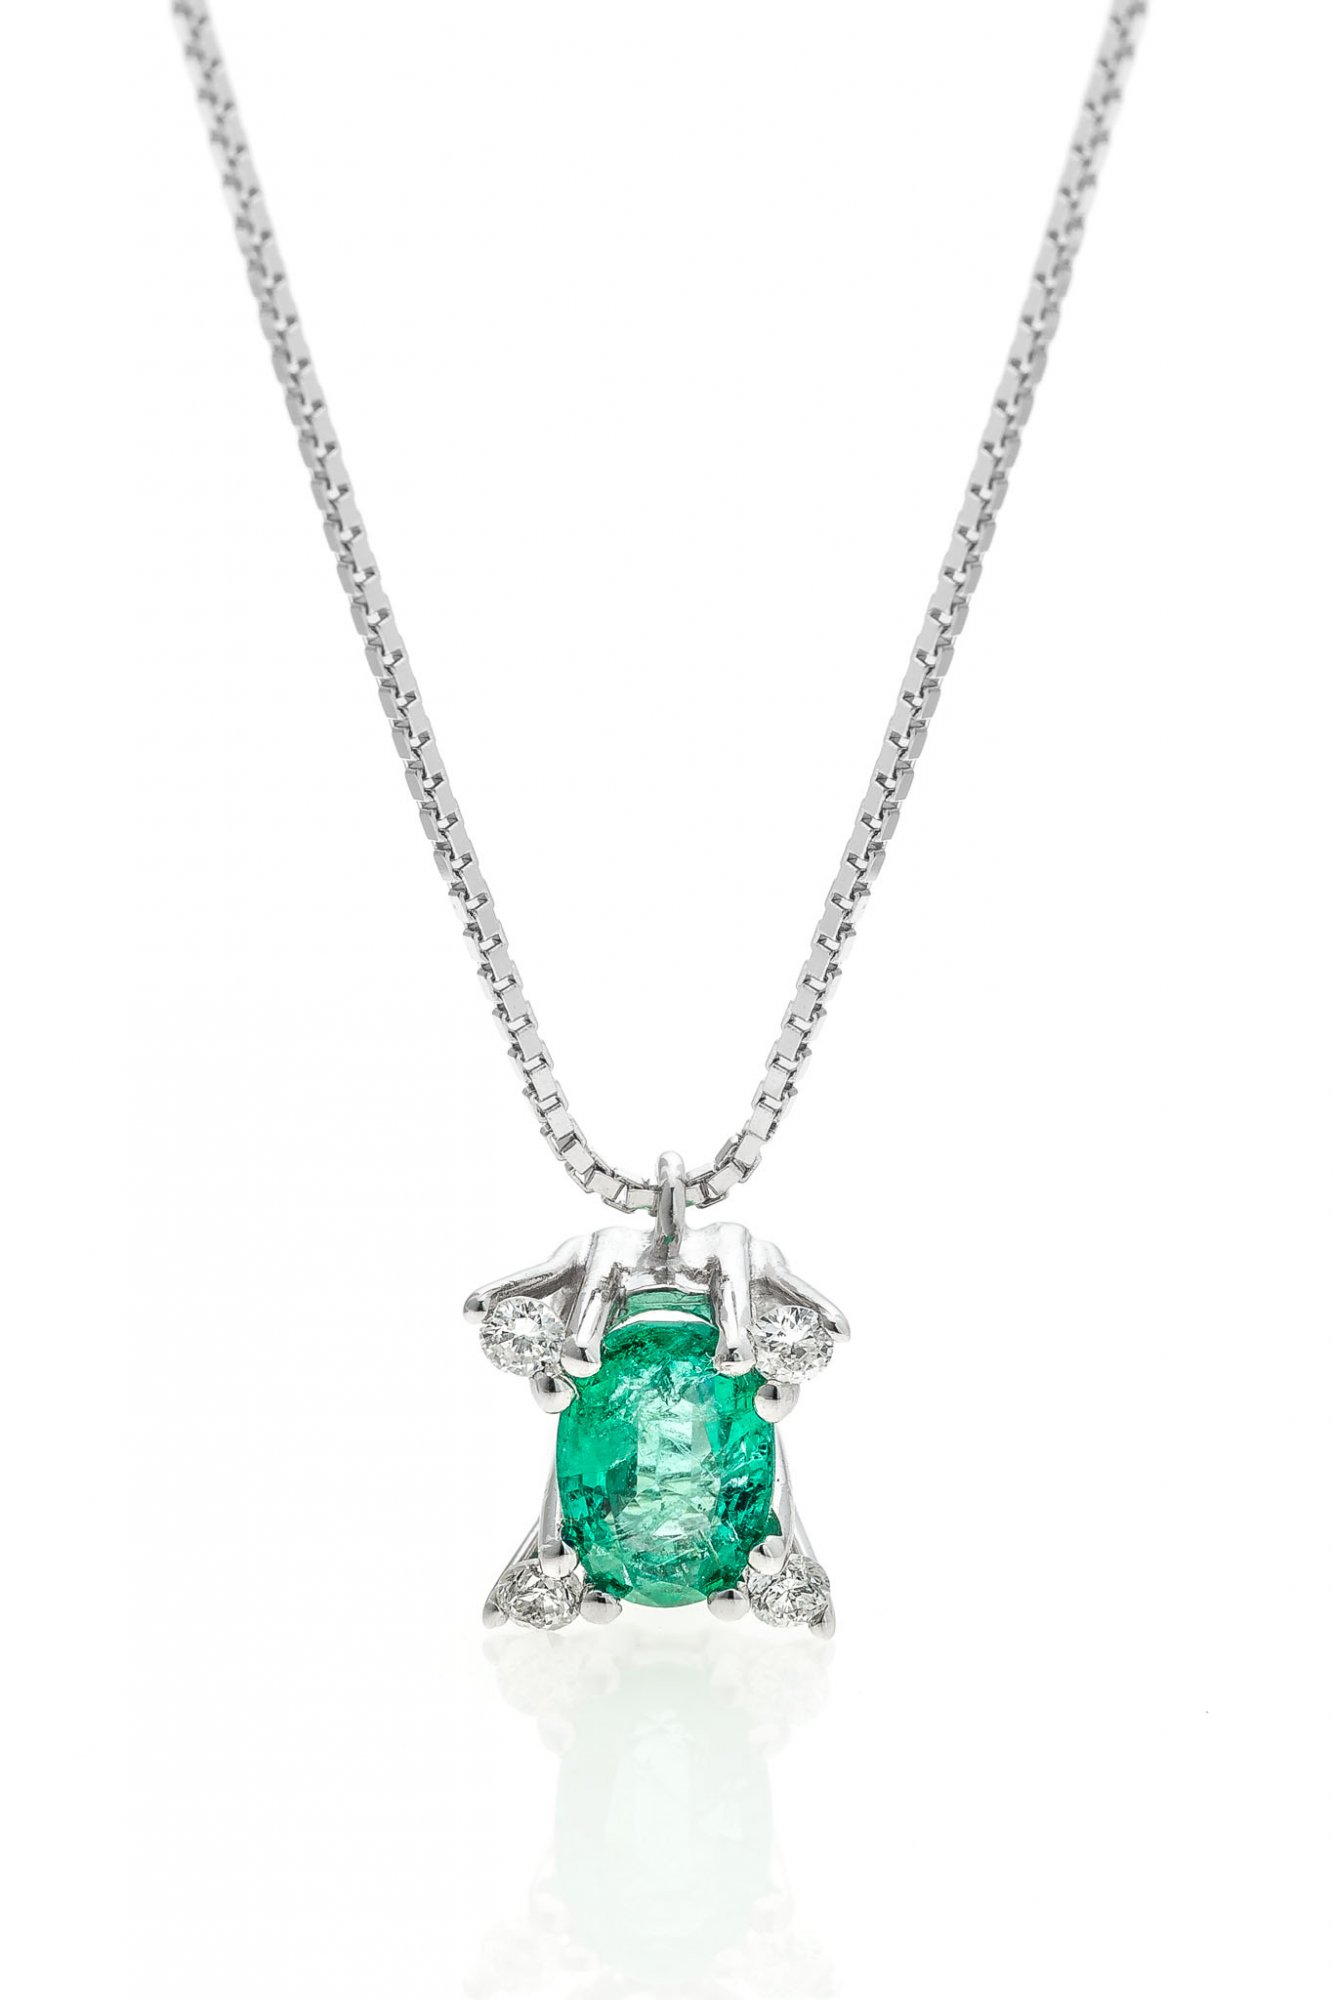 18 KT white gold necklace with natural Columbia emerald and natural round brilliant cut diamonds